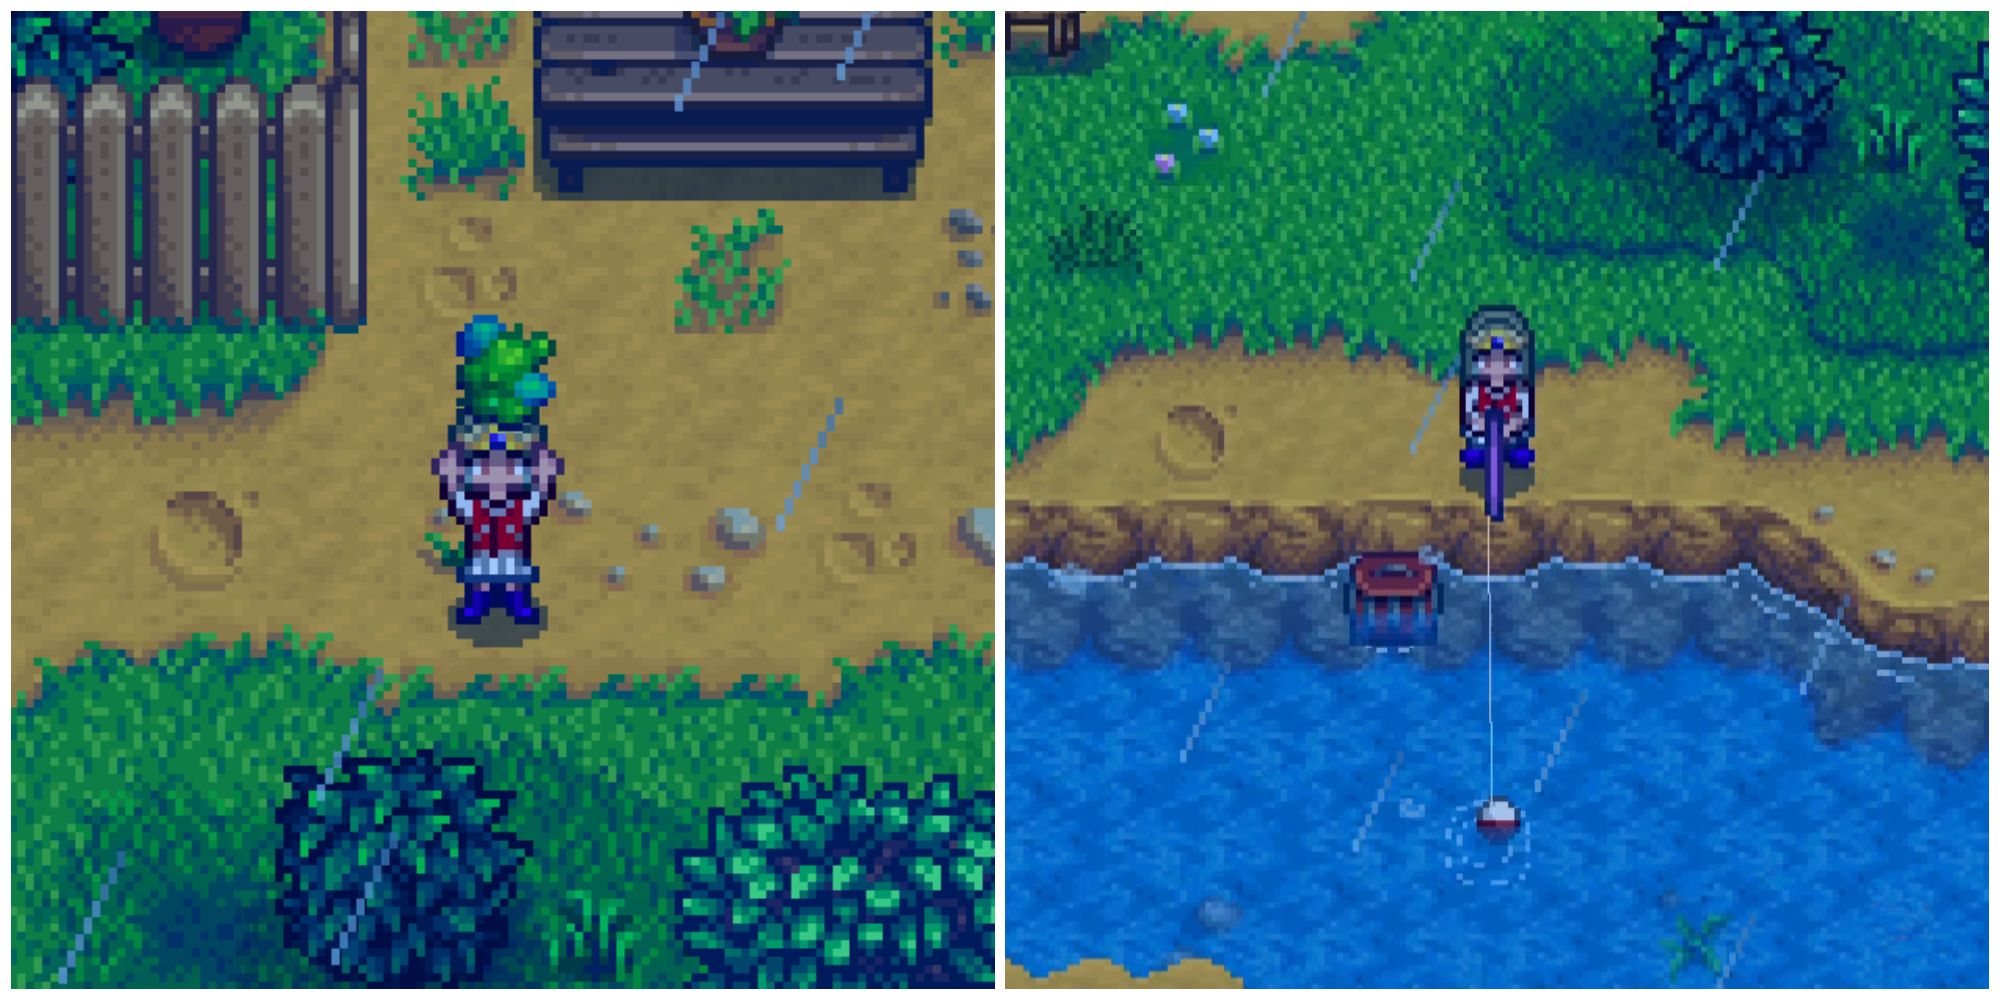 Split image of a character holding a river jelly and a character fishing in a river in Stardew Valley